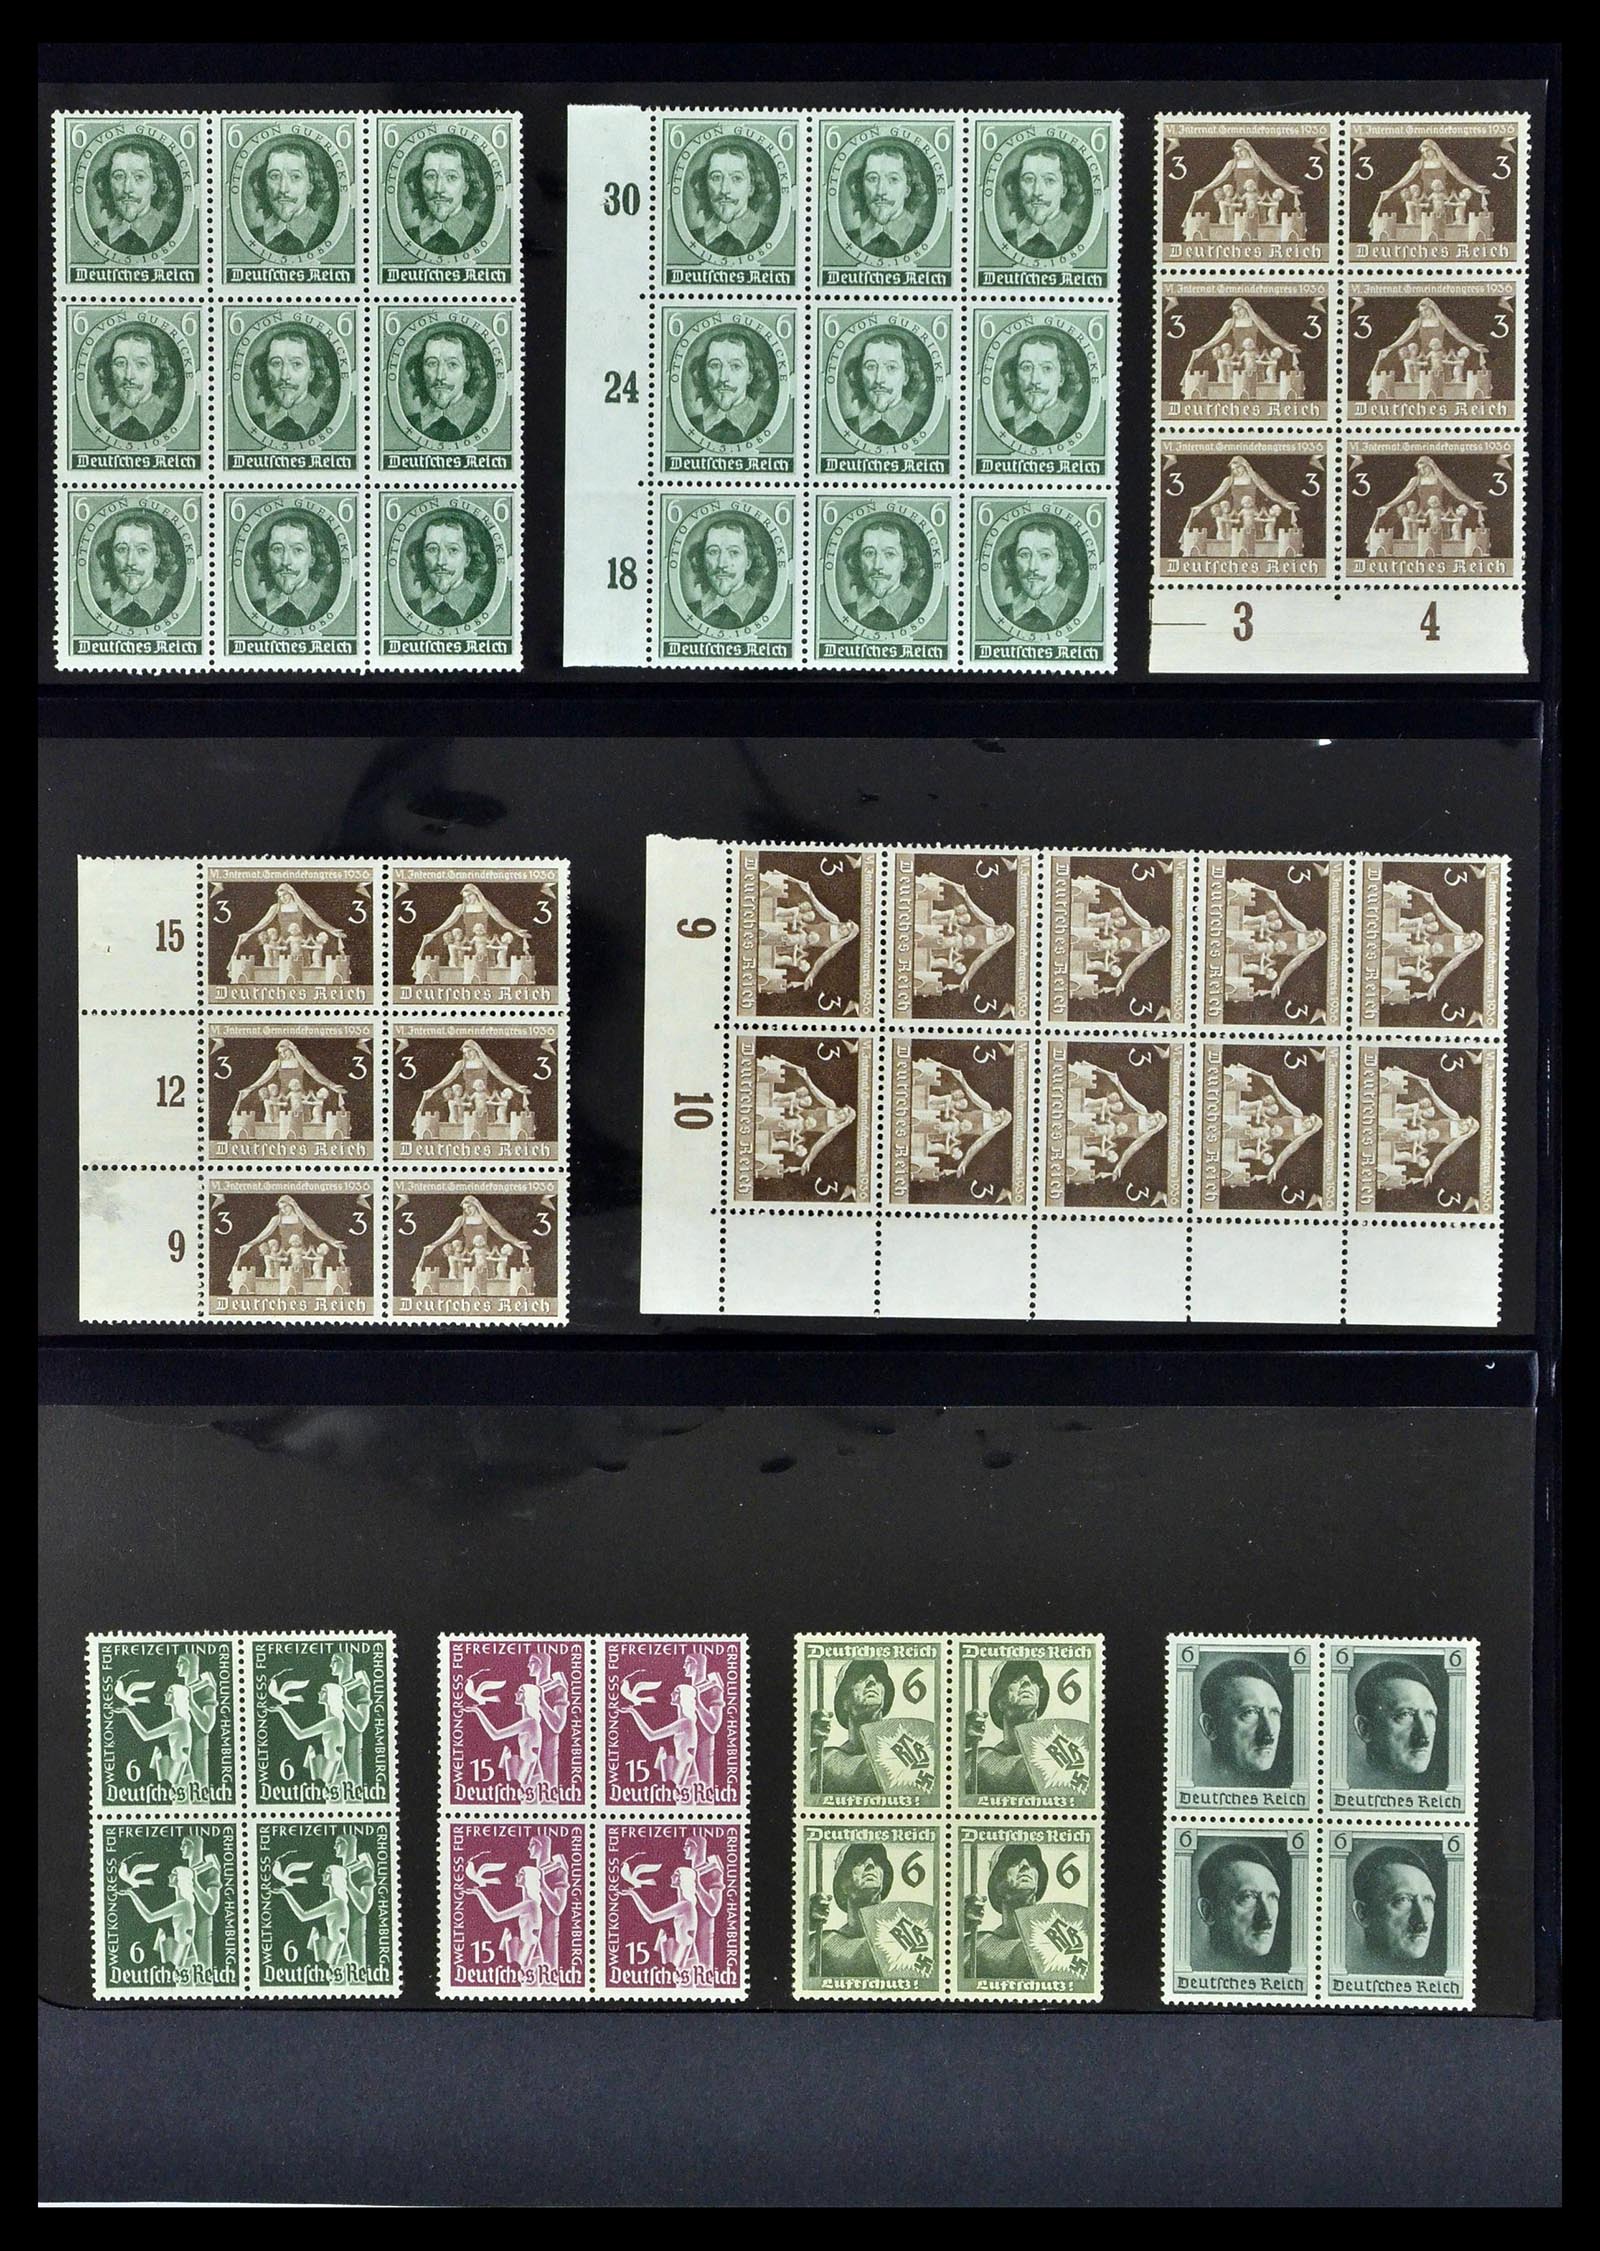 39255 0018 - Stamp collection 39255 German Reich MNH blocks of 4.